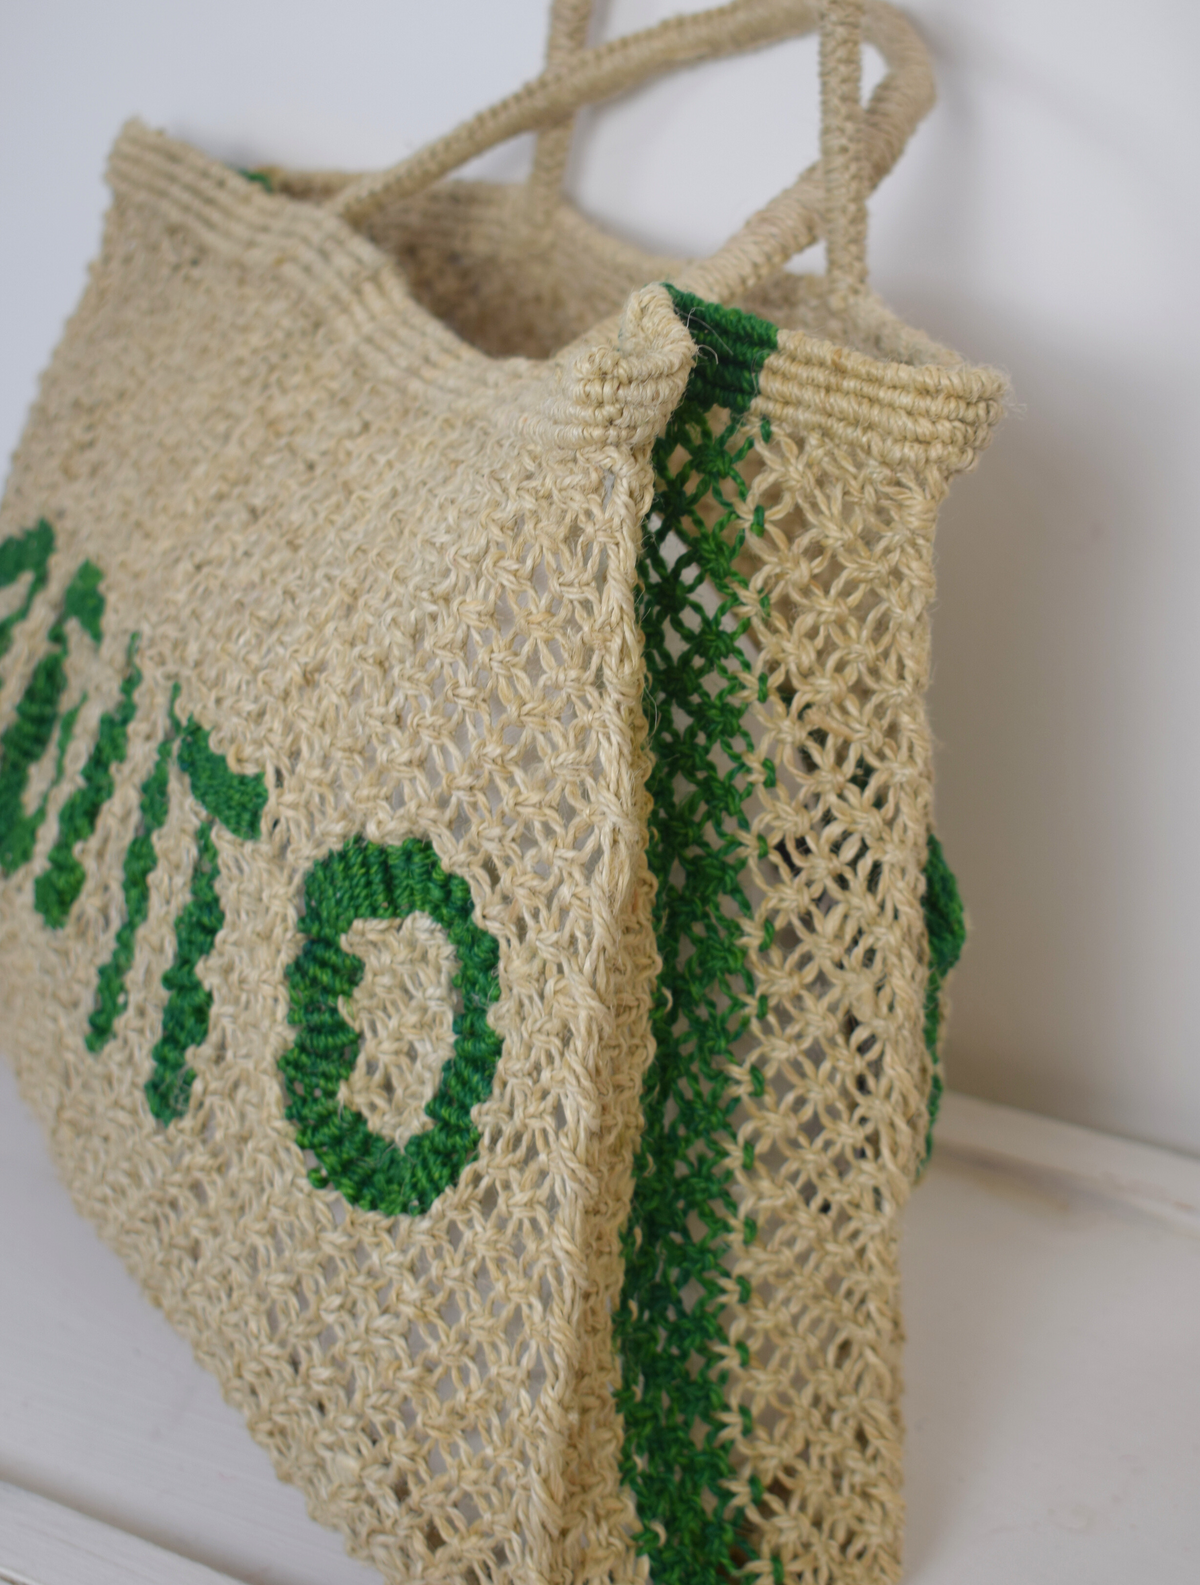 Neutral woven bags with green writing saying 'Mojito"